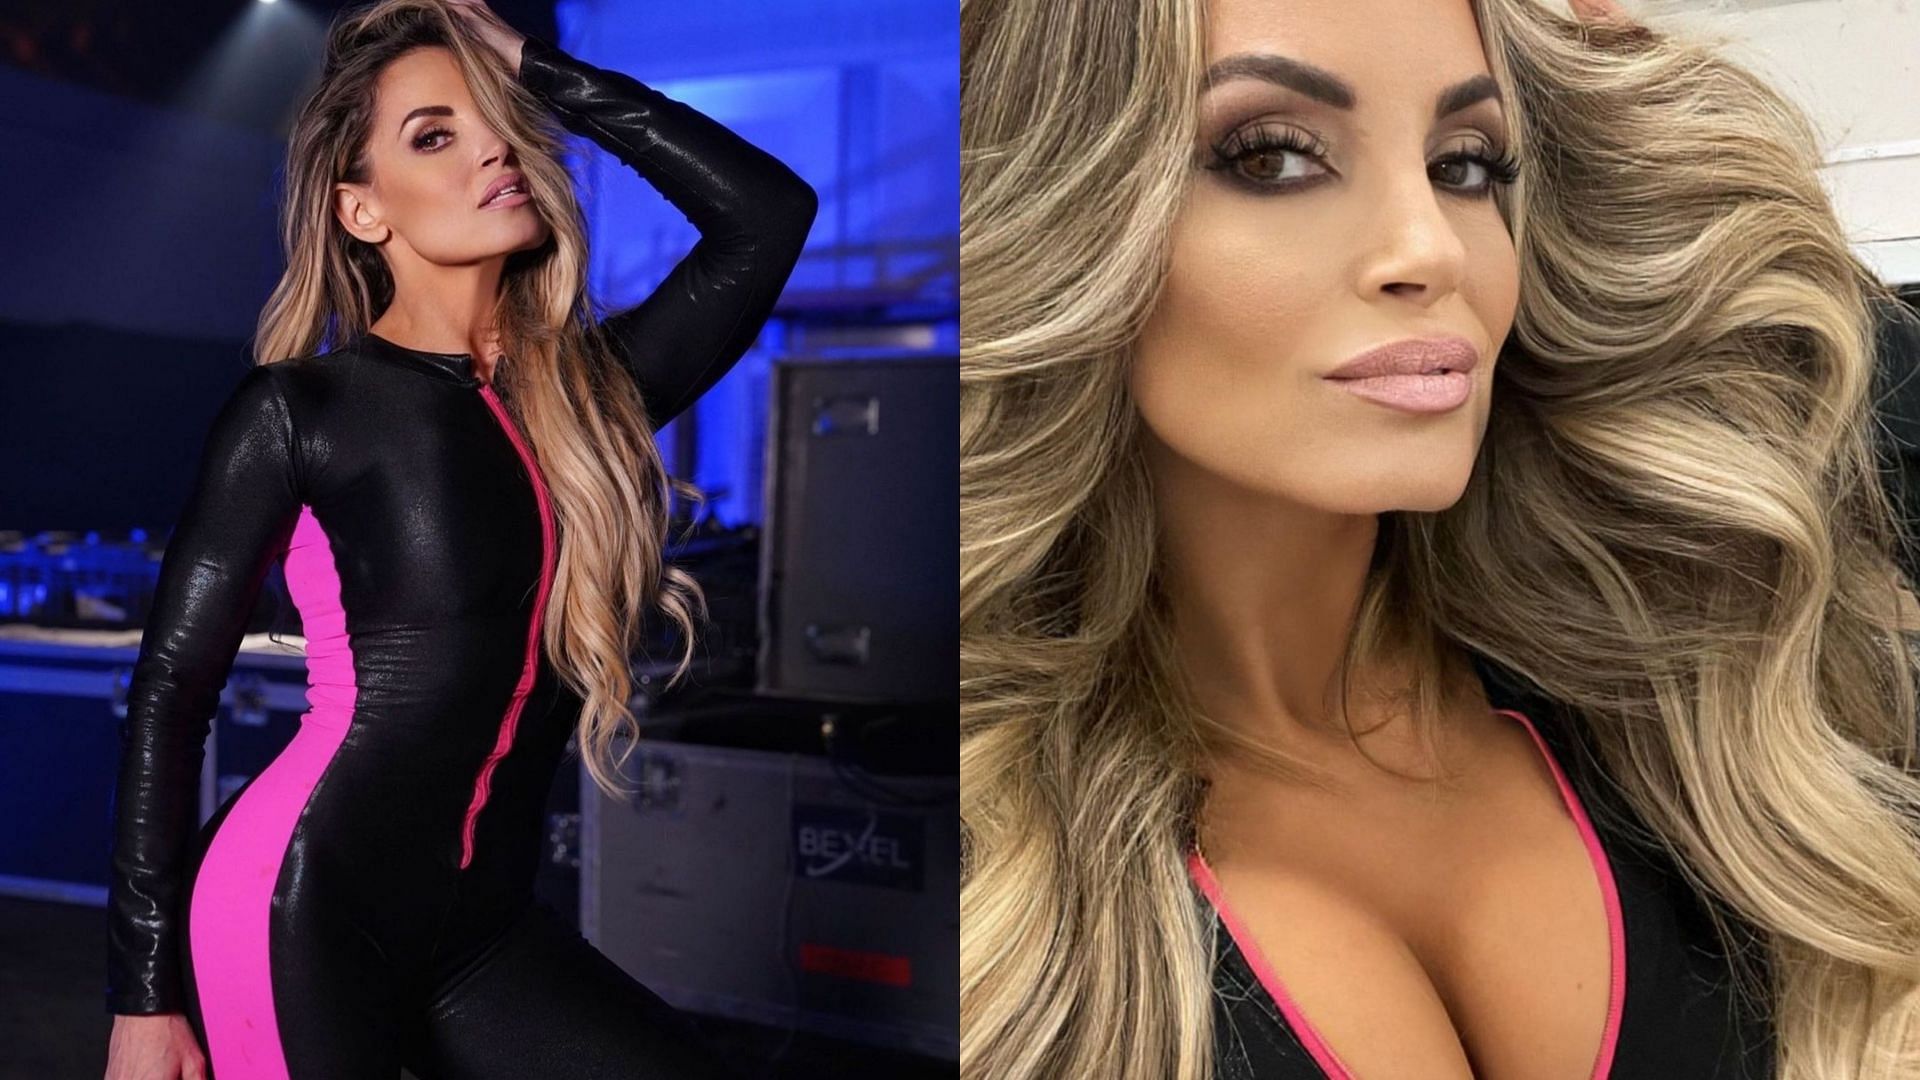 WWE Hall of Famer Trish Stratus is currently active on RAW